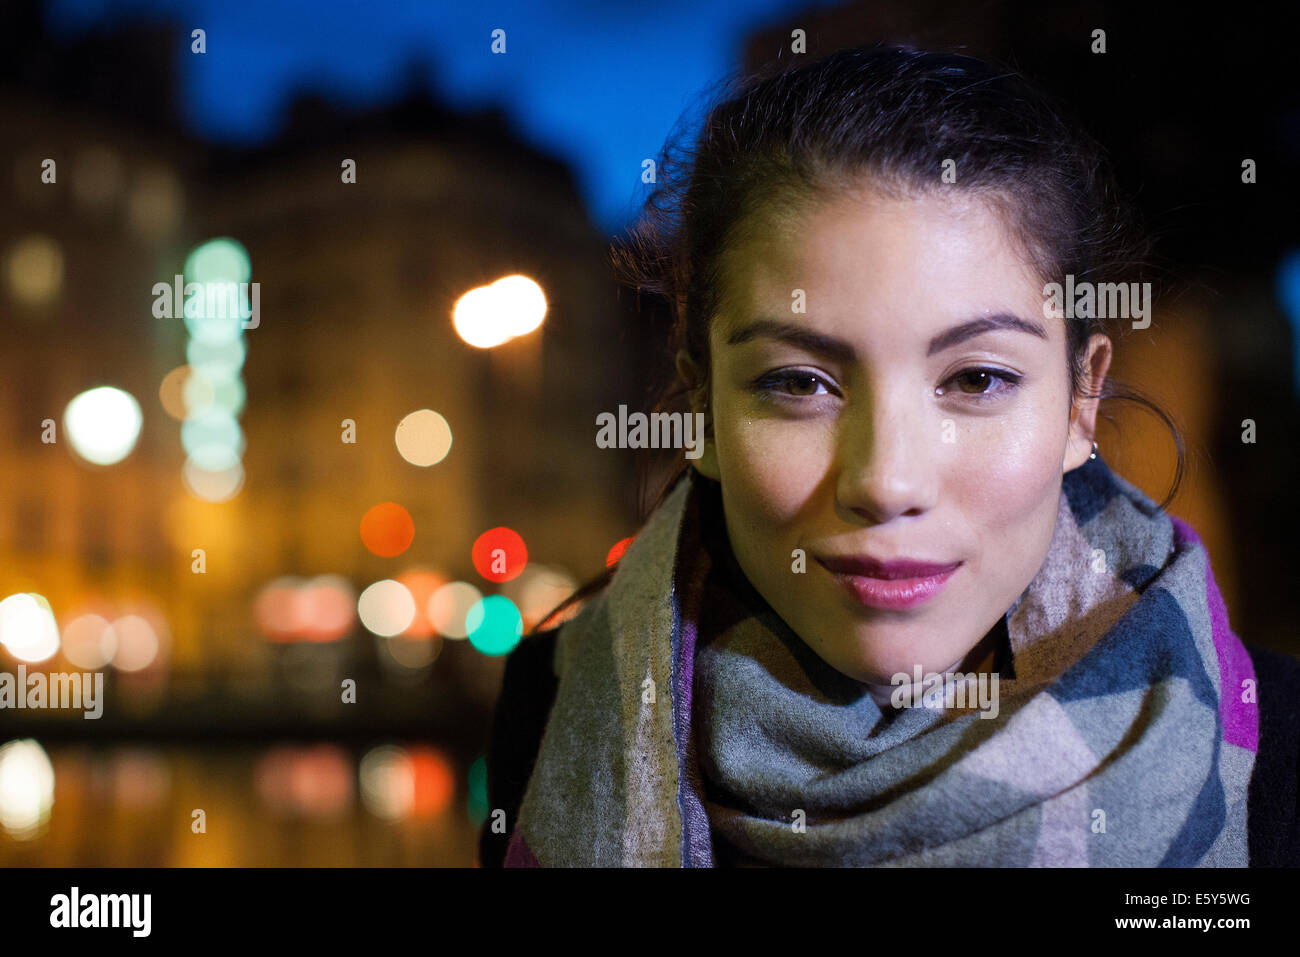 Young woman outdoors dressed warmly, portrait Stock Photo